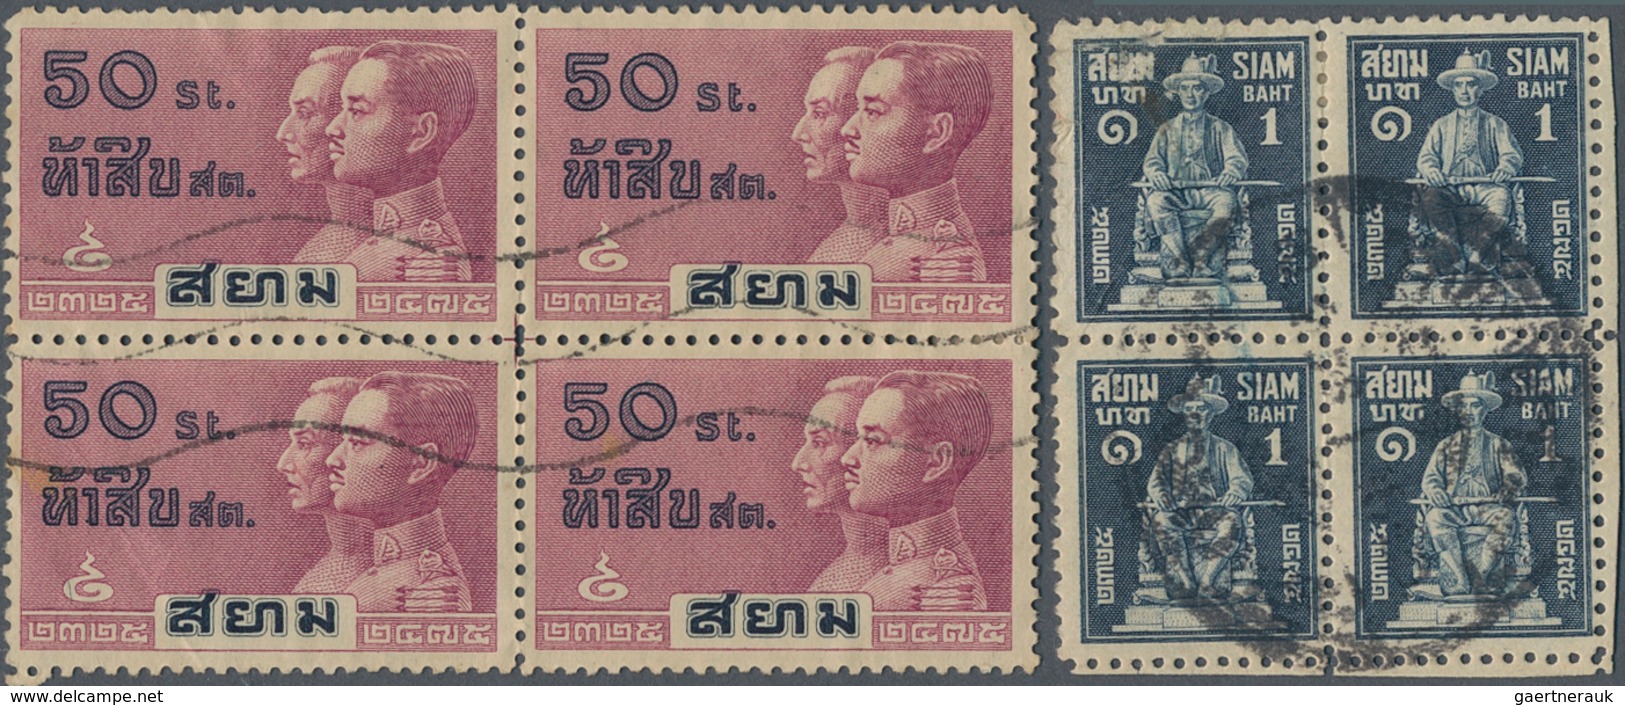 Thailand: 1932, Anniversary, 8 Values In Blocs Of Four, Used, Perforation Partly Defects. - Tailandia